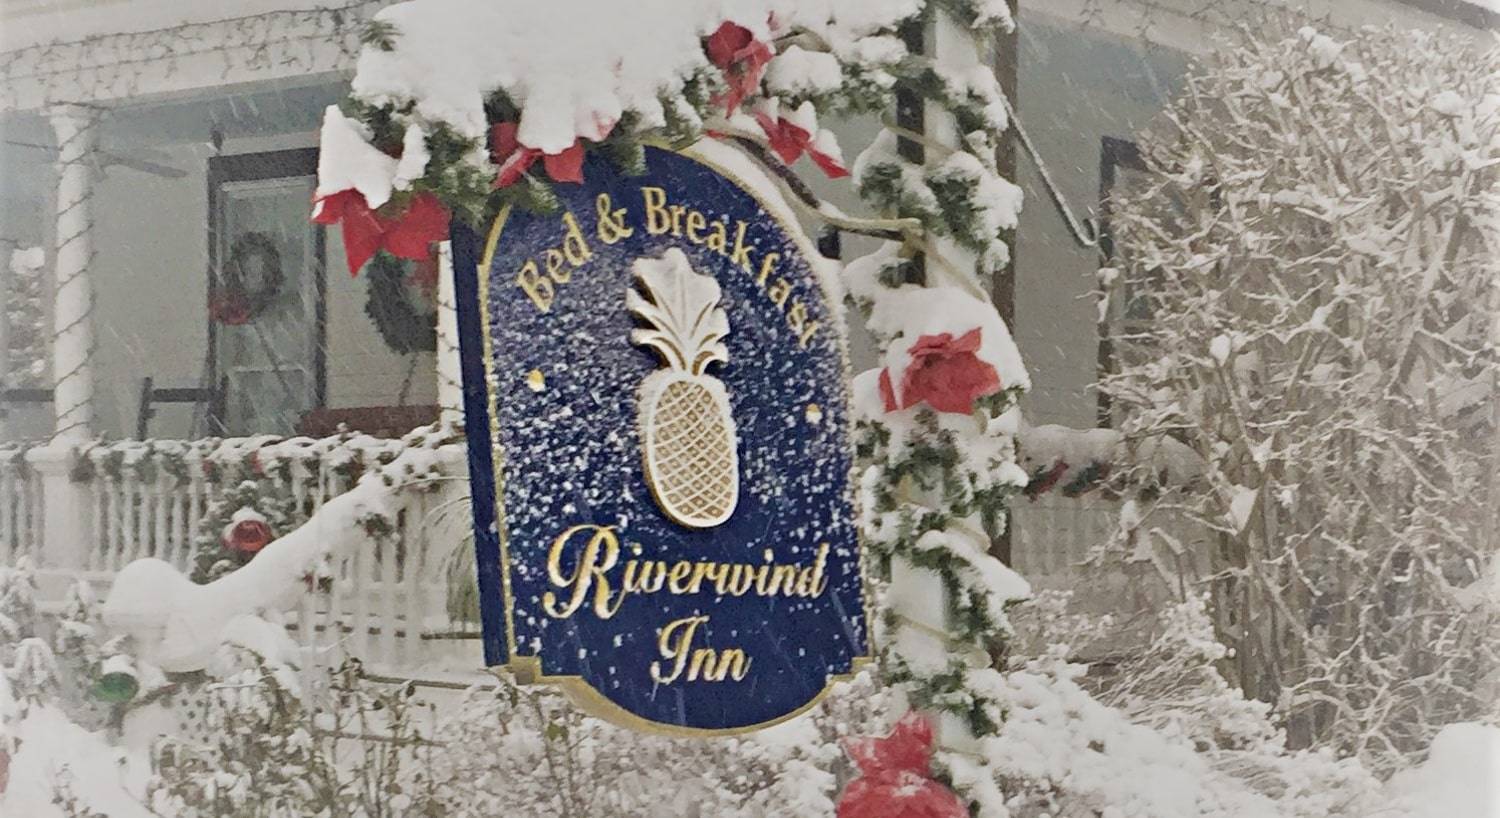 Blue oval sign for a bed and breakfast covered with freshly fallen snow